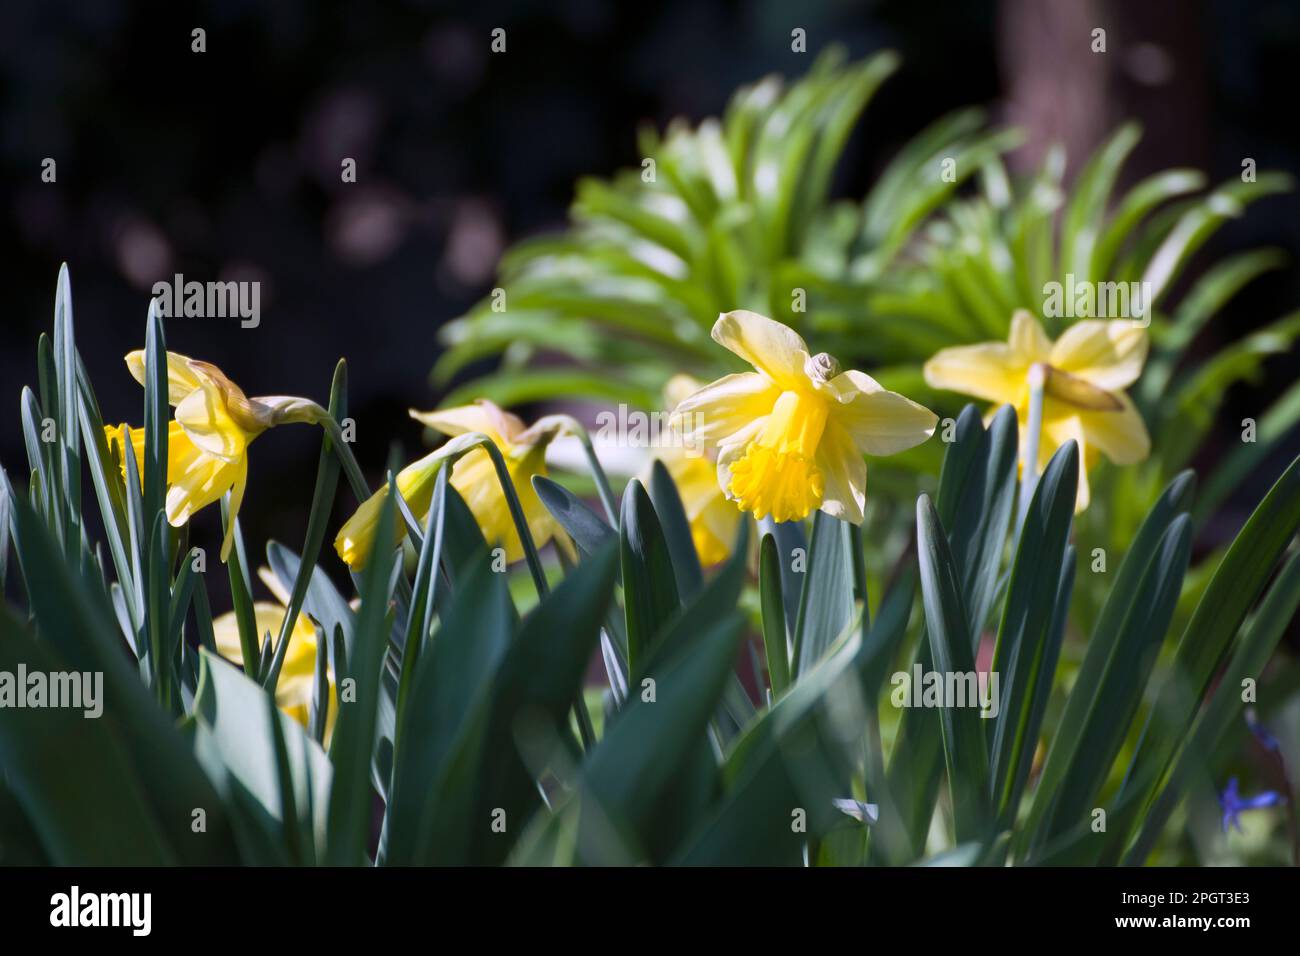 Narcissus,  pseudo narcissus, wild daffodil or lent lily is a perennial flowering, bulbous plant that typically bears bright yellow flowers. Stock Photo